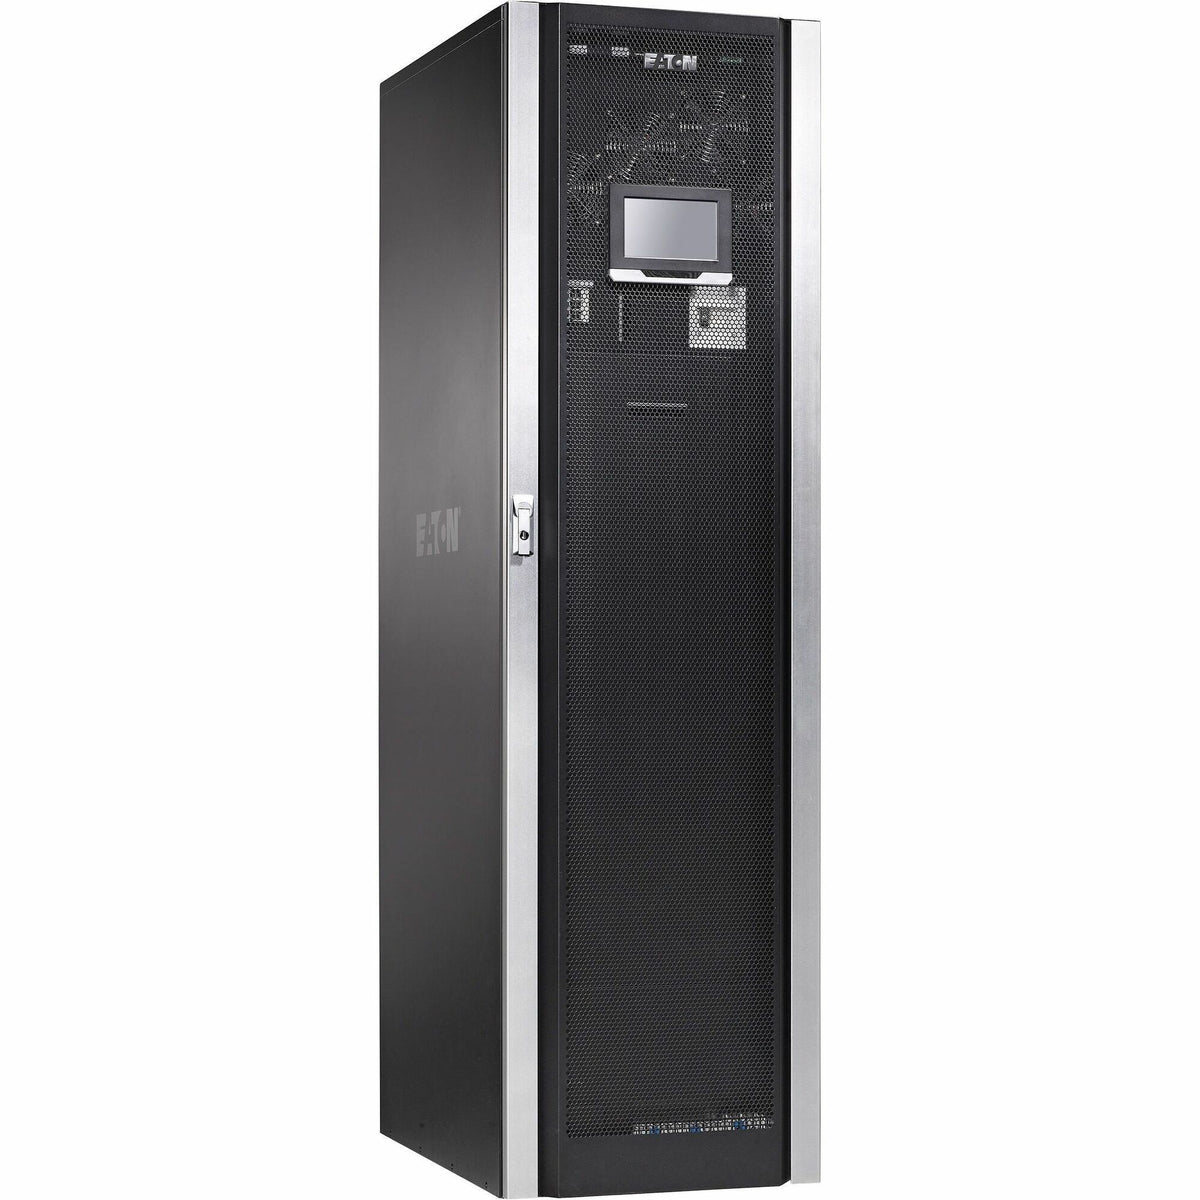 Eaton 93PM 10kW Tower UPS - 9GC102A429A00R0